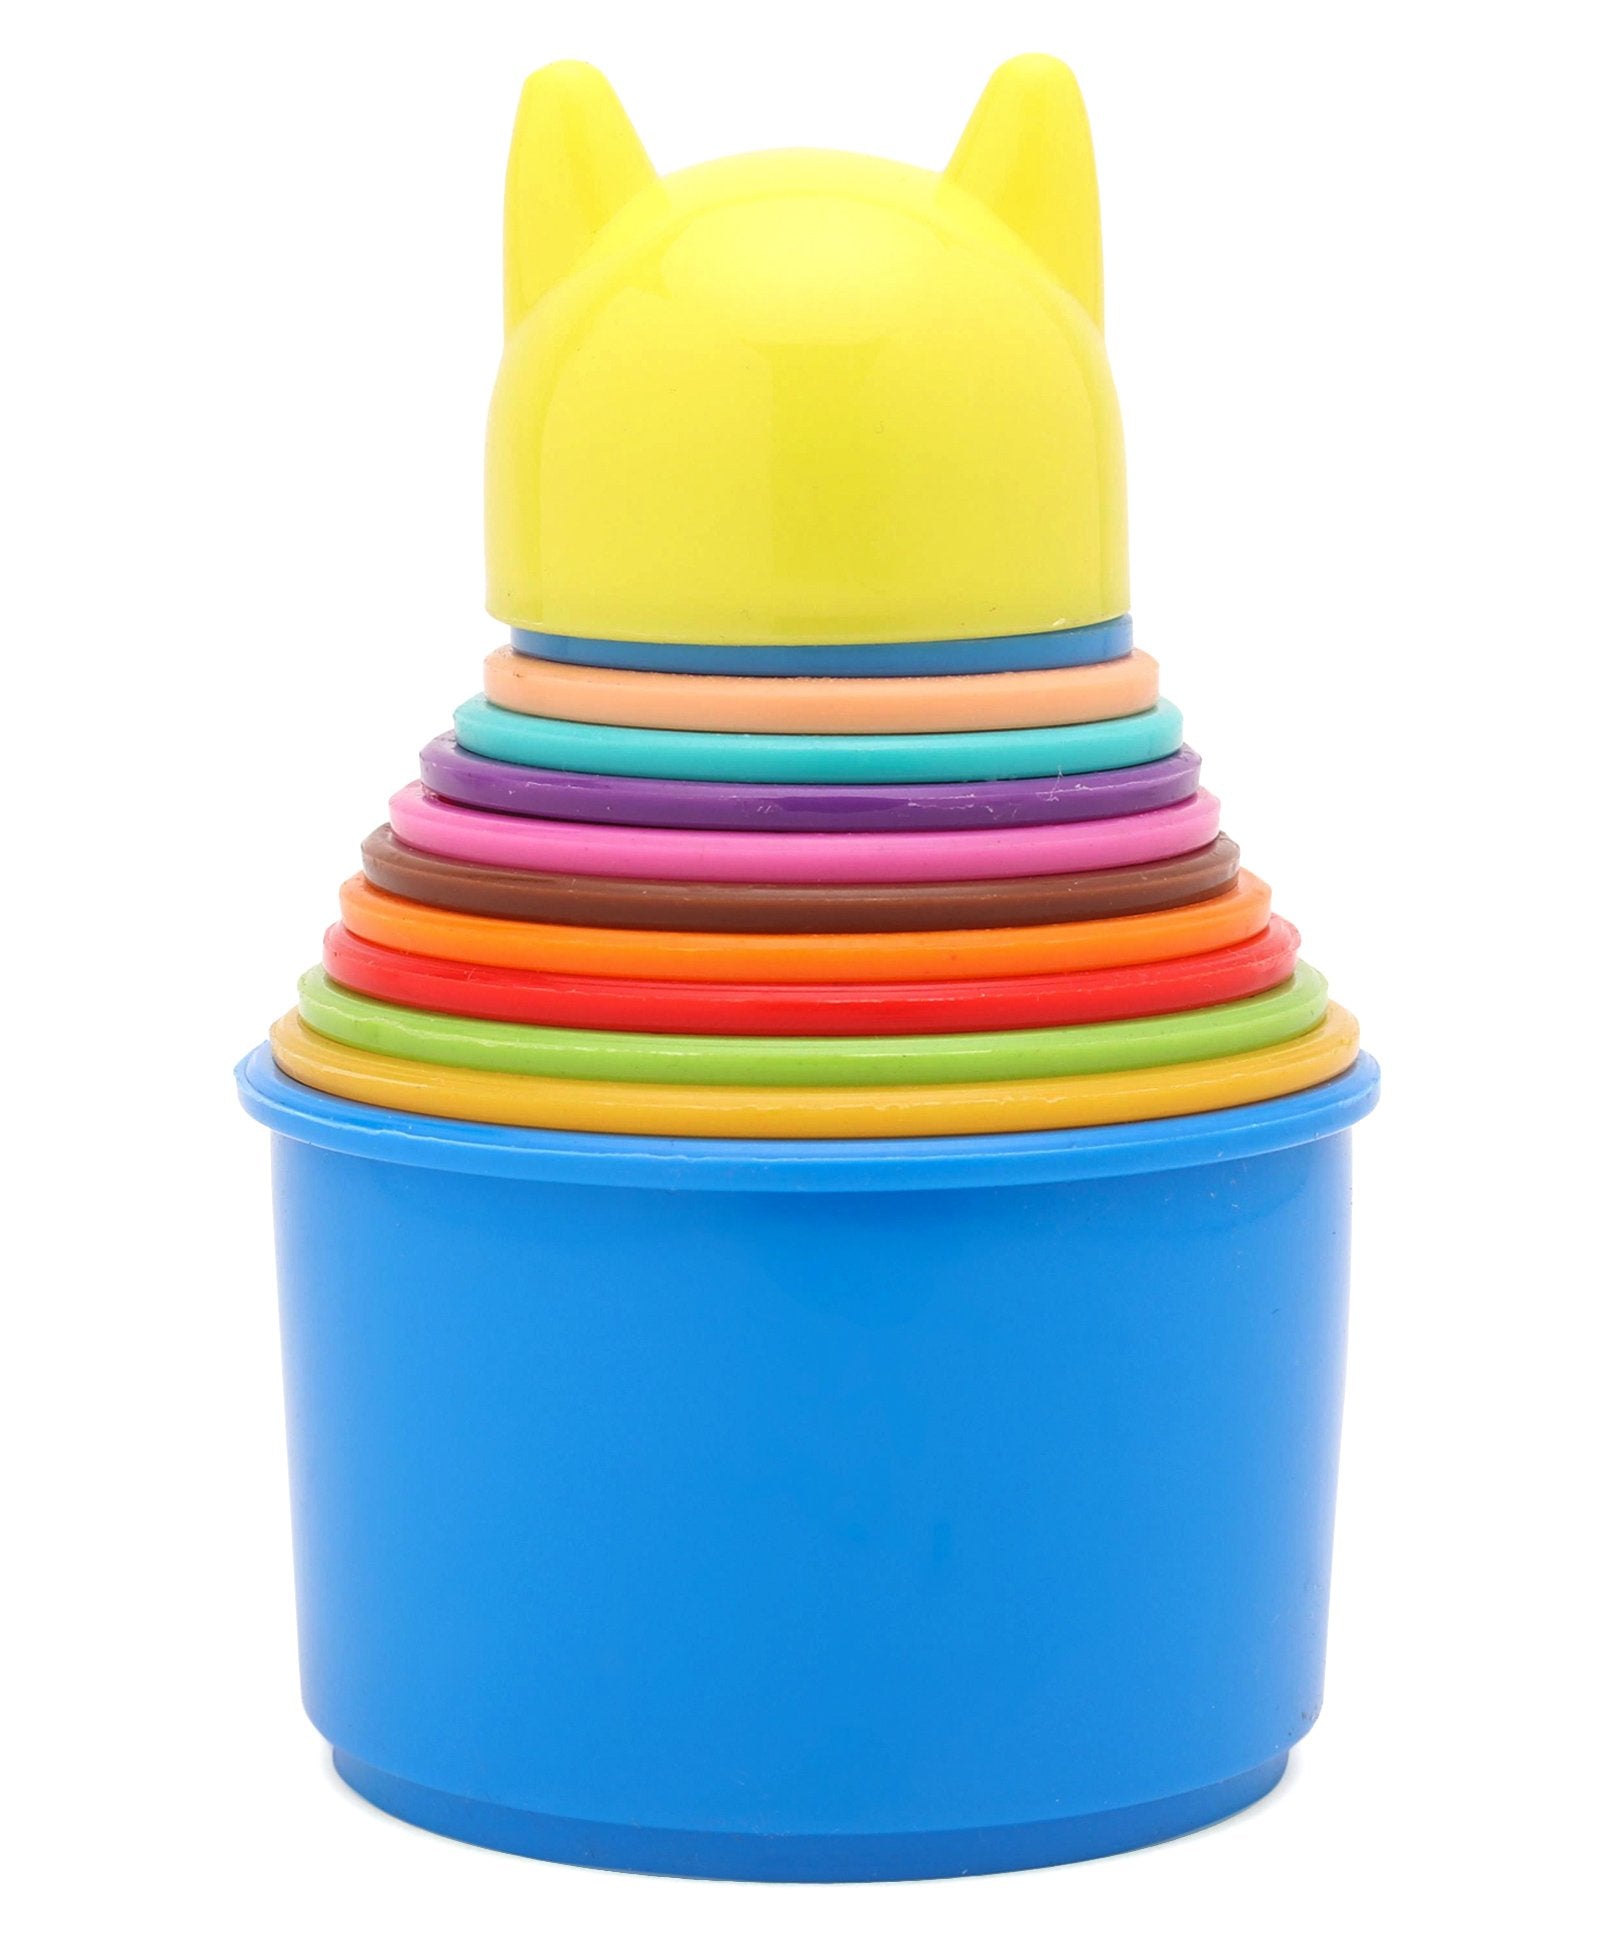 Petals Fair Stacking Cup Set - 13 Pieces (Colors May Vary)